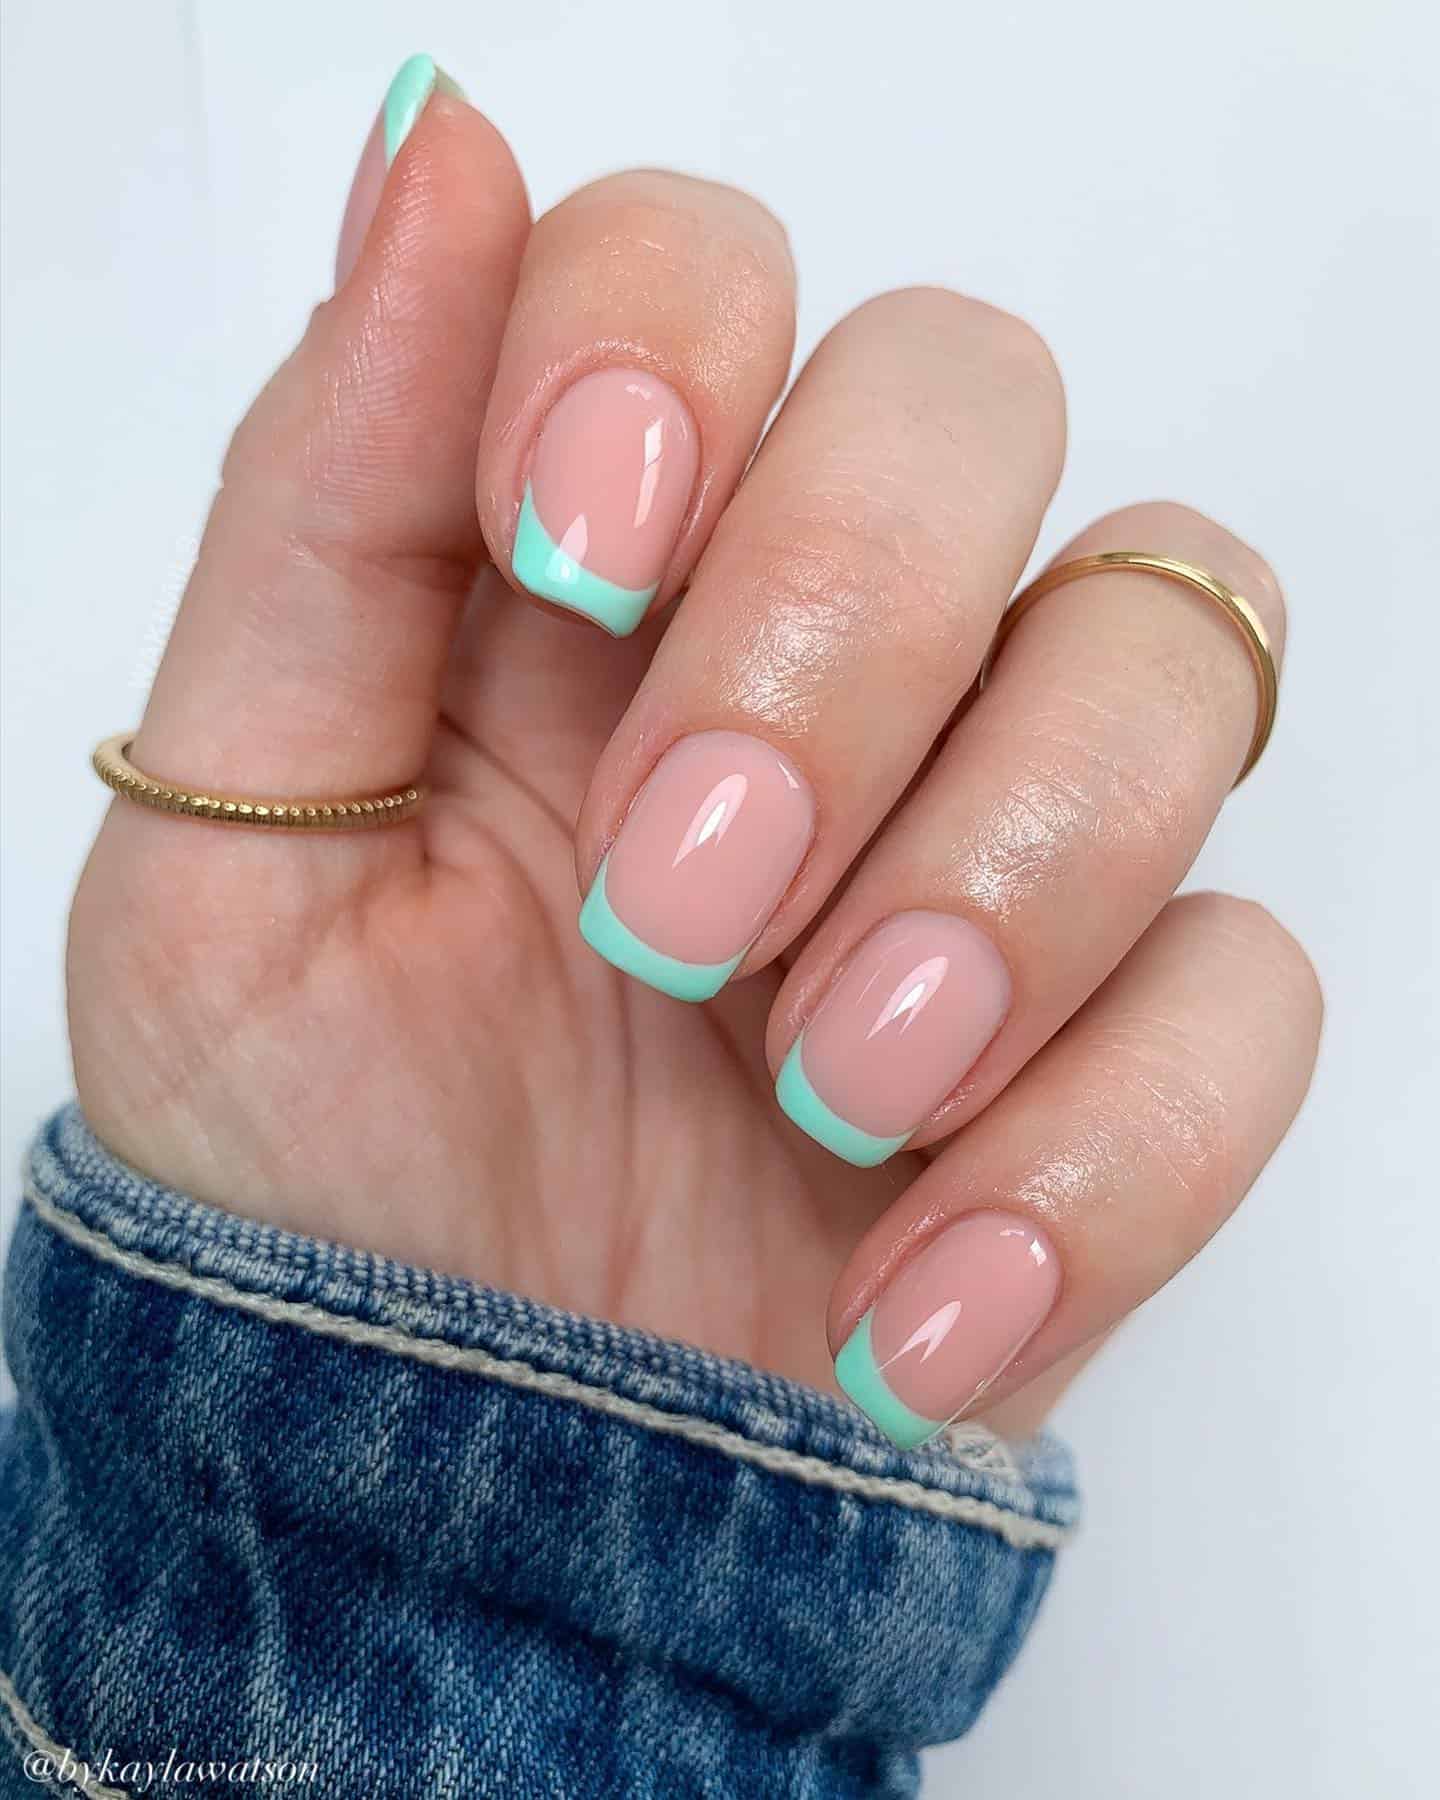 A hand with short square nails painted with mint green French tips